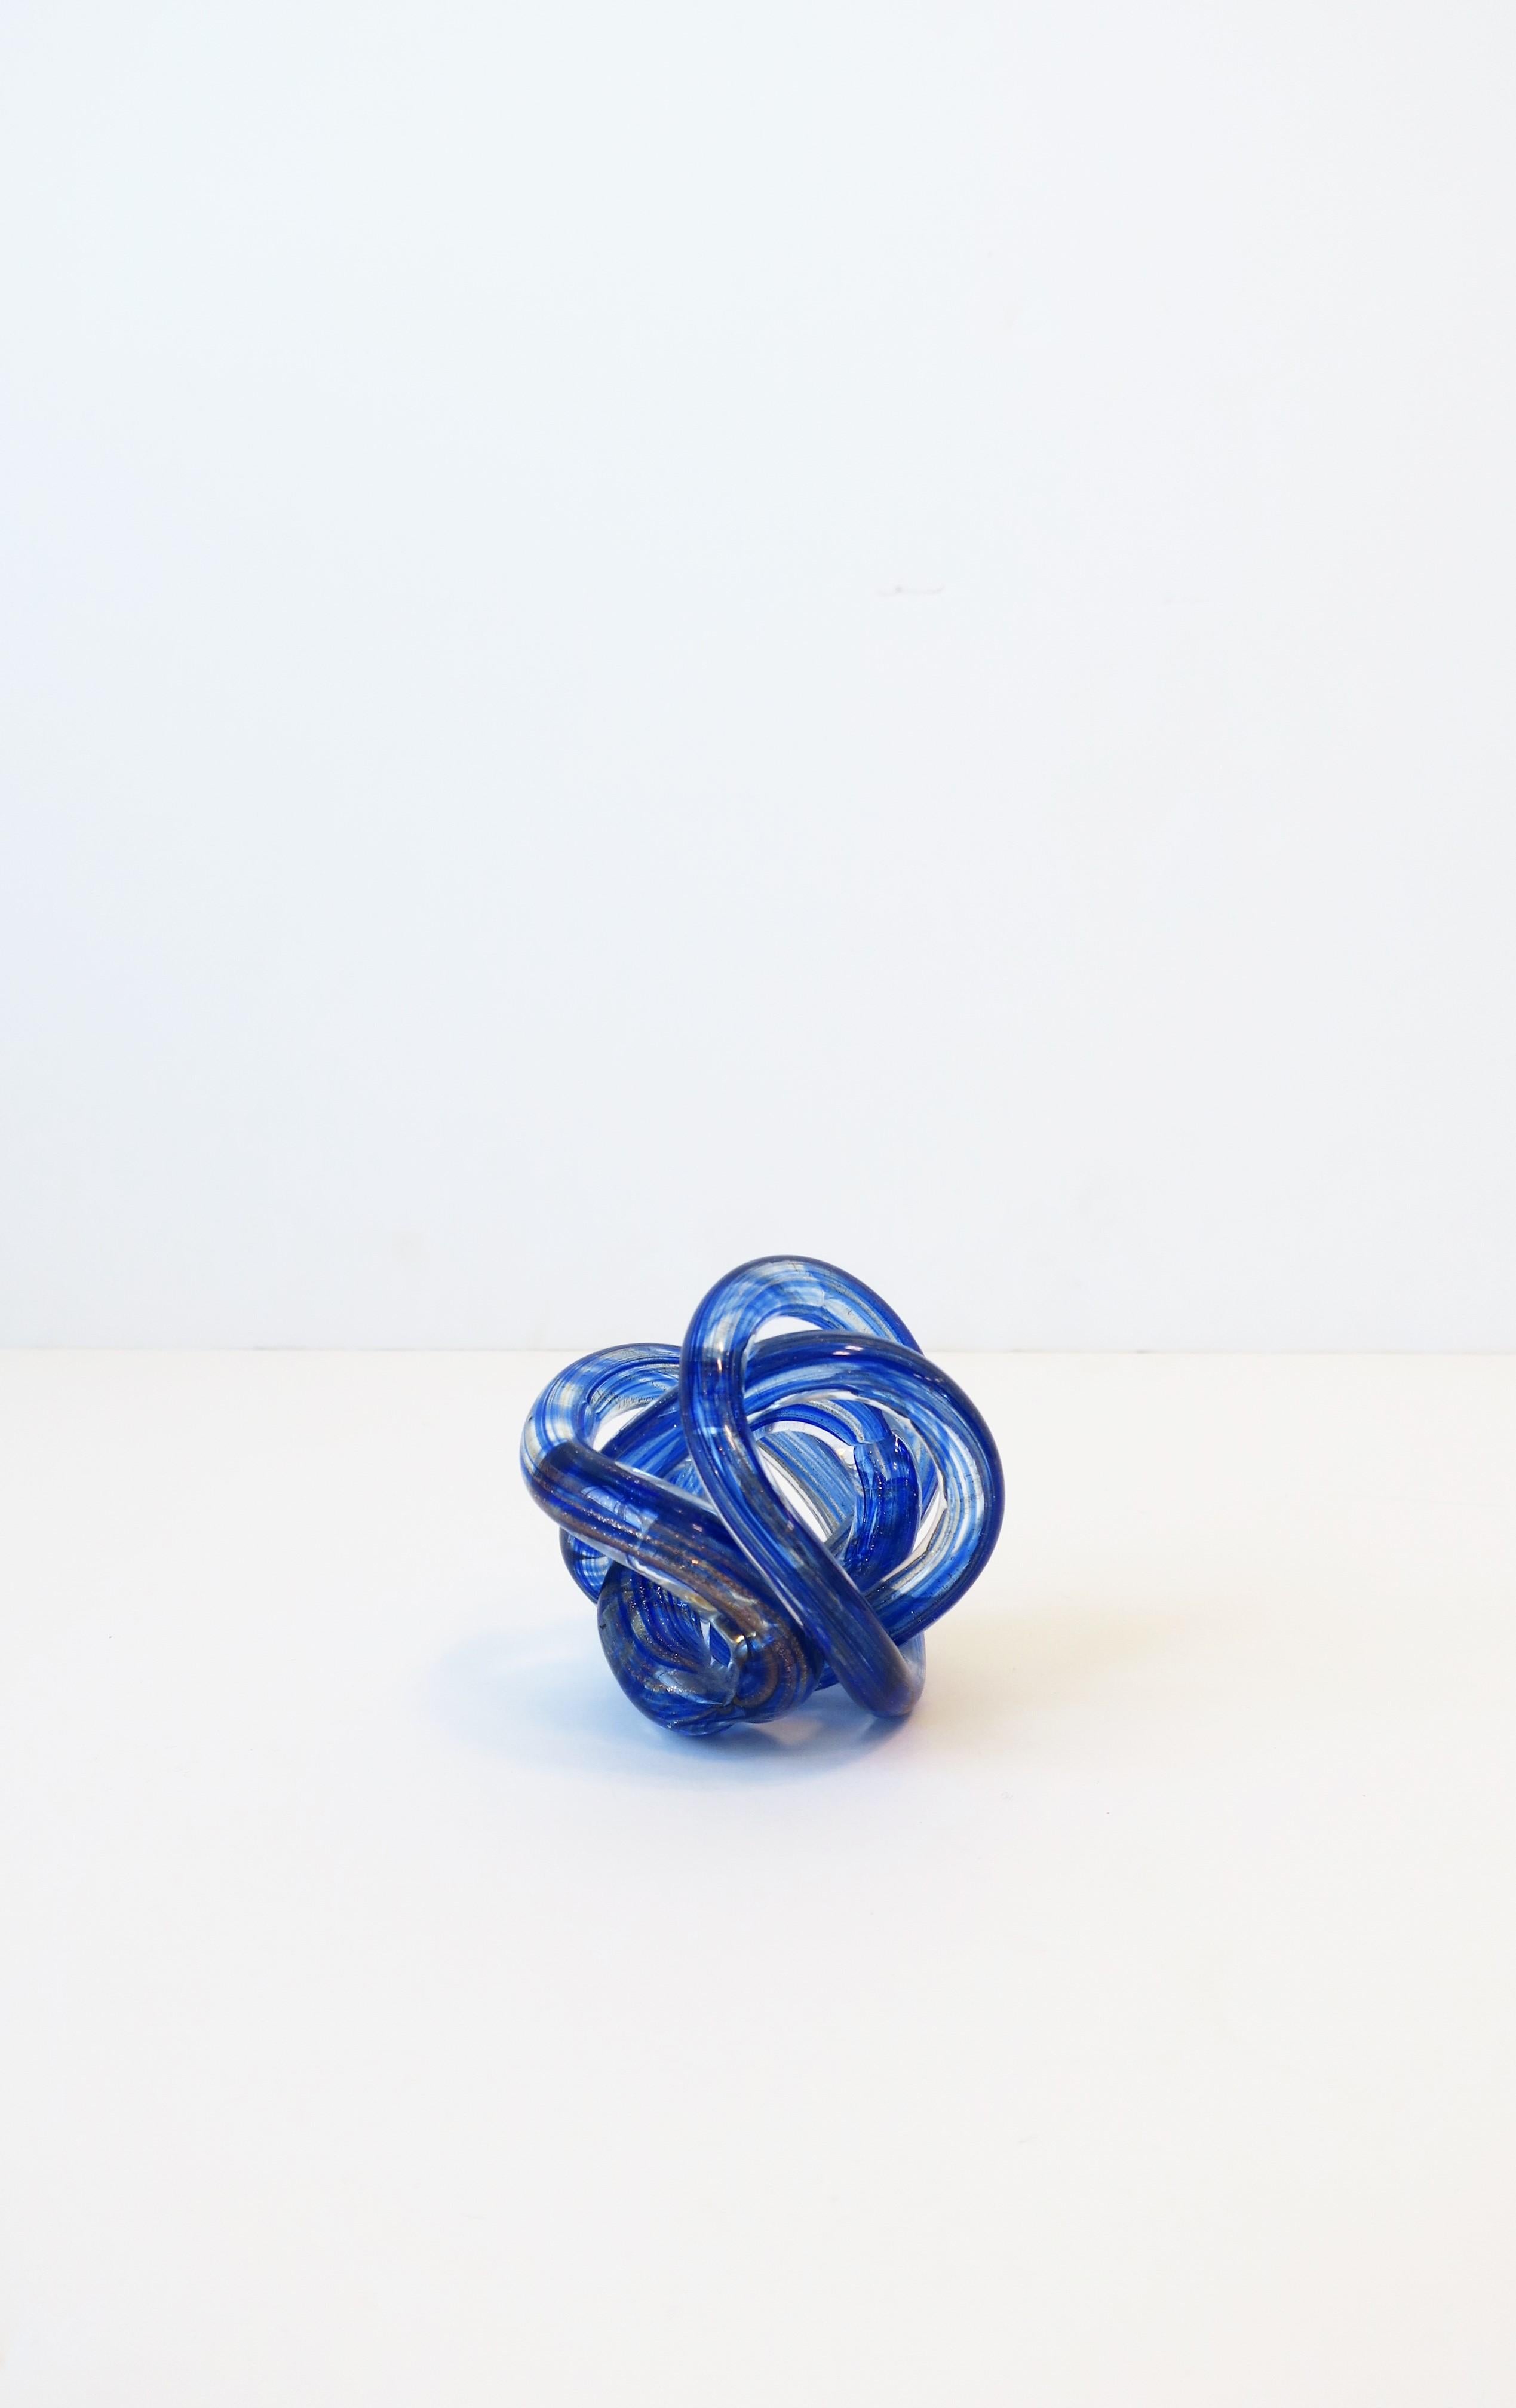 A beautiful blue, shimmering copper, and clear art glass knot decorative object. A chic piece for a desk, shelf, etc.

Piece measures: 2.75